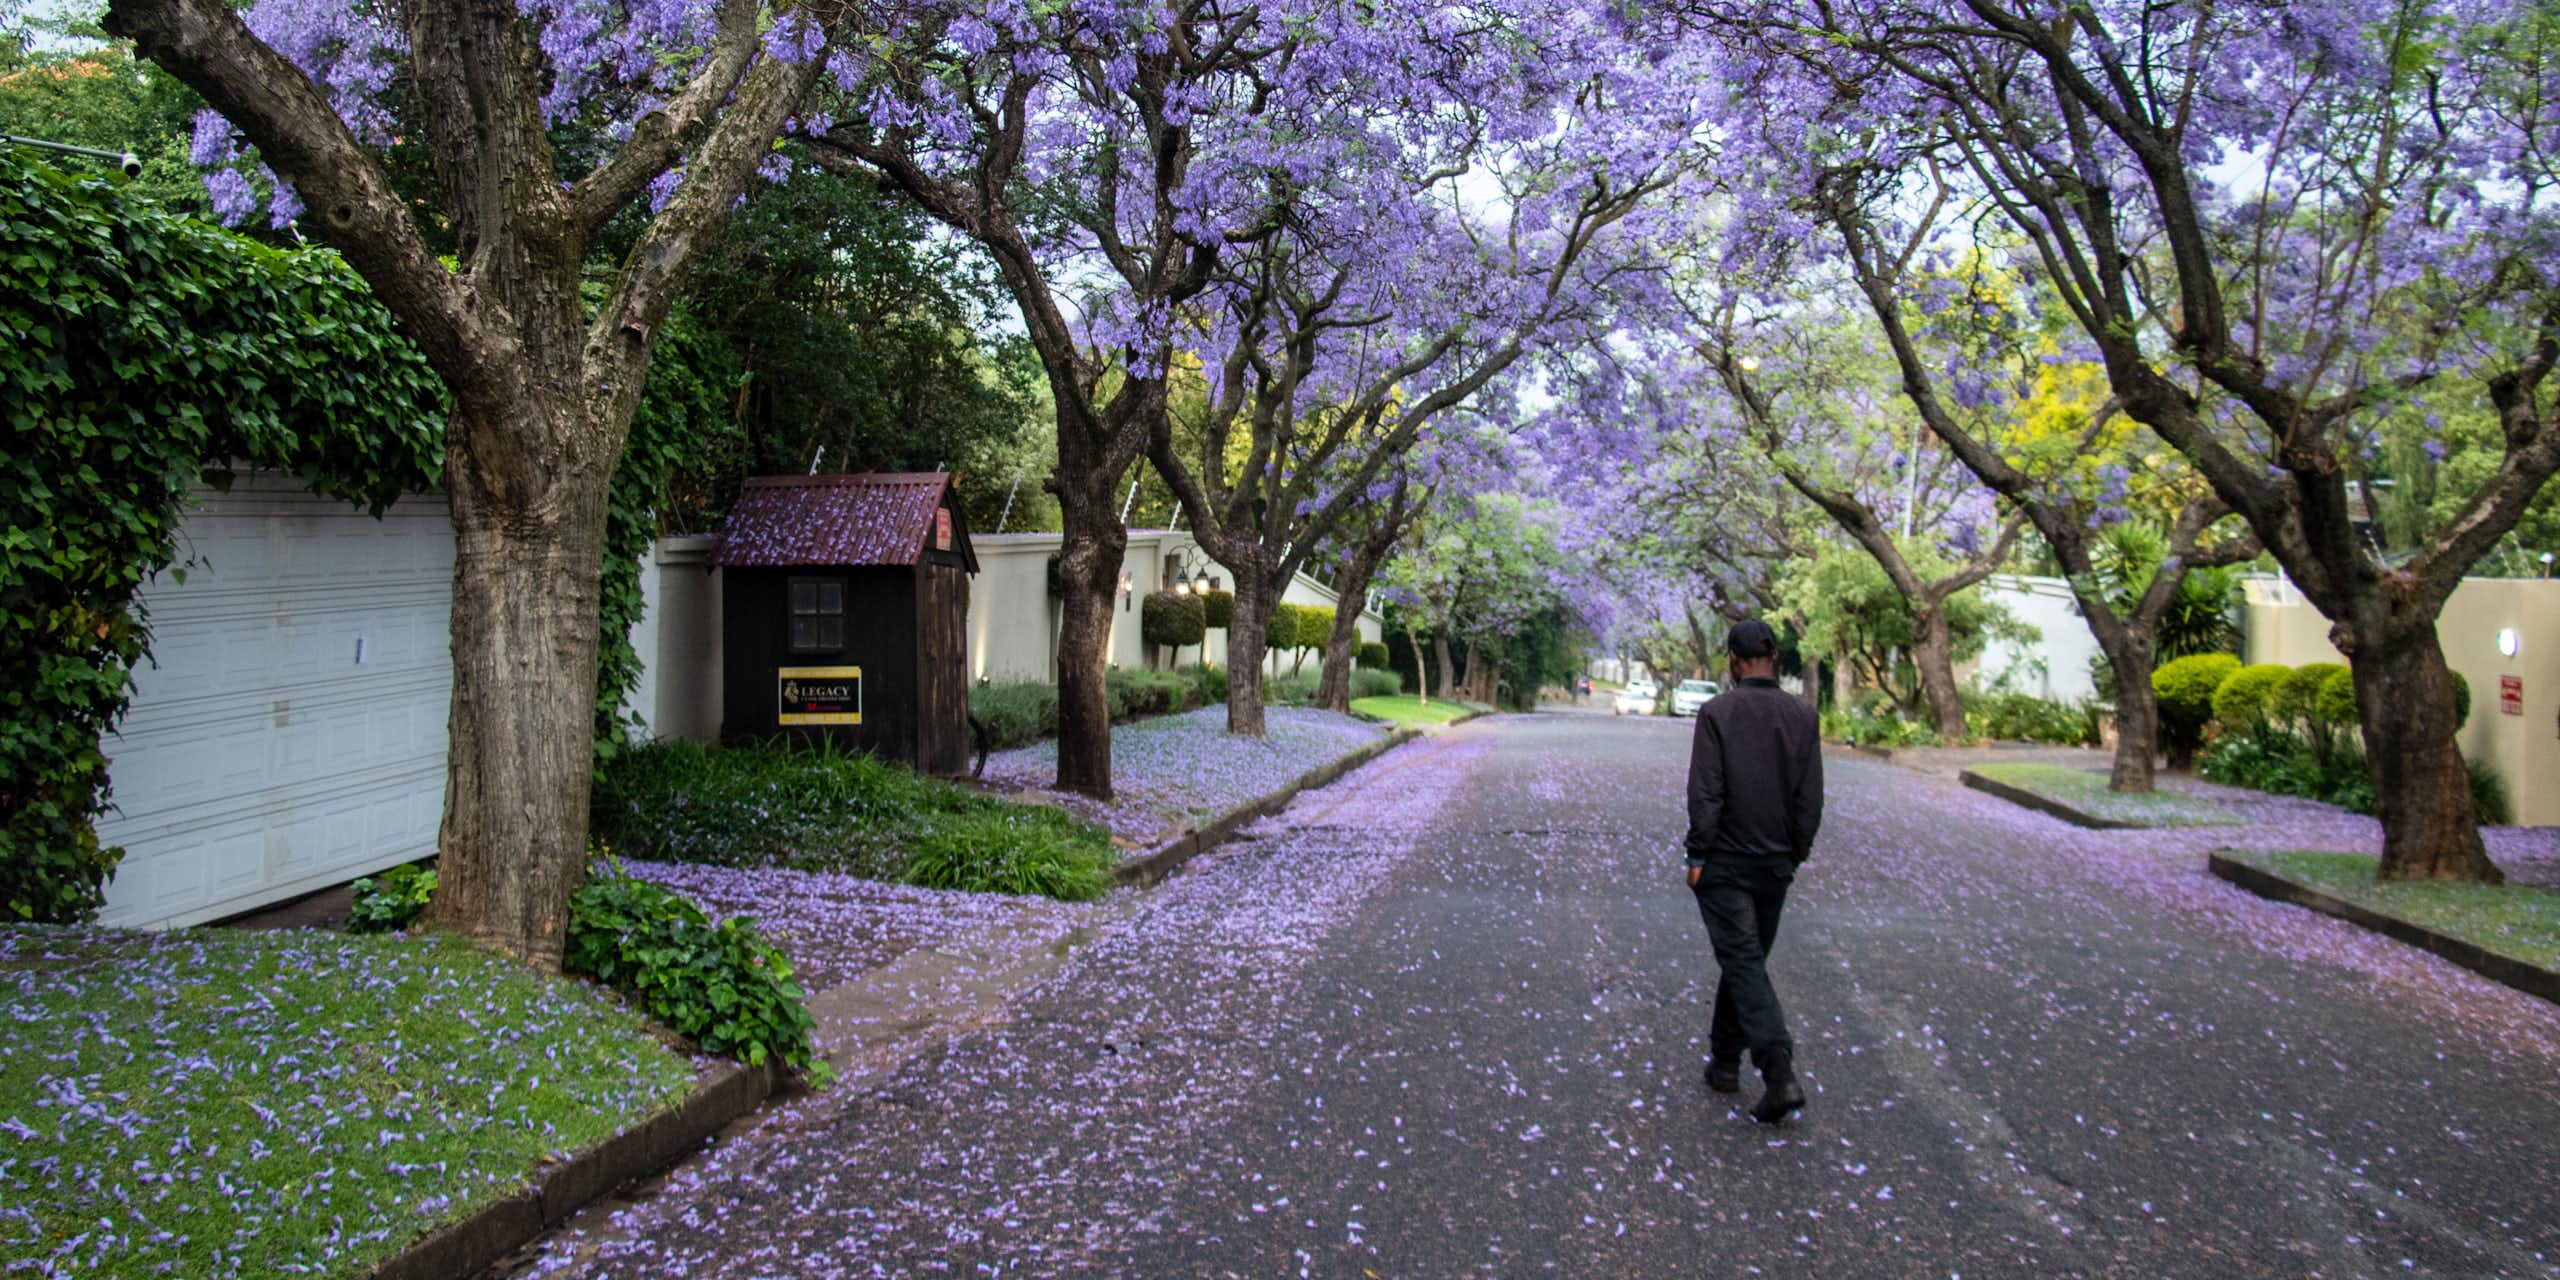 A suburban Johannesburg street, a man walks under rows of purple-flowered trees with his hands in his pockets, seen from behind